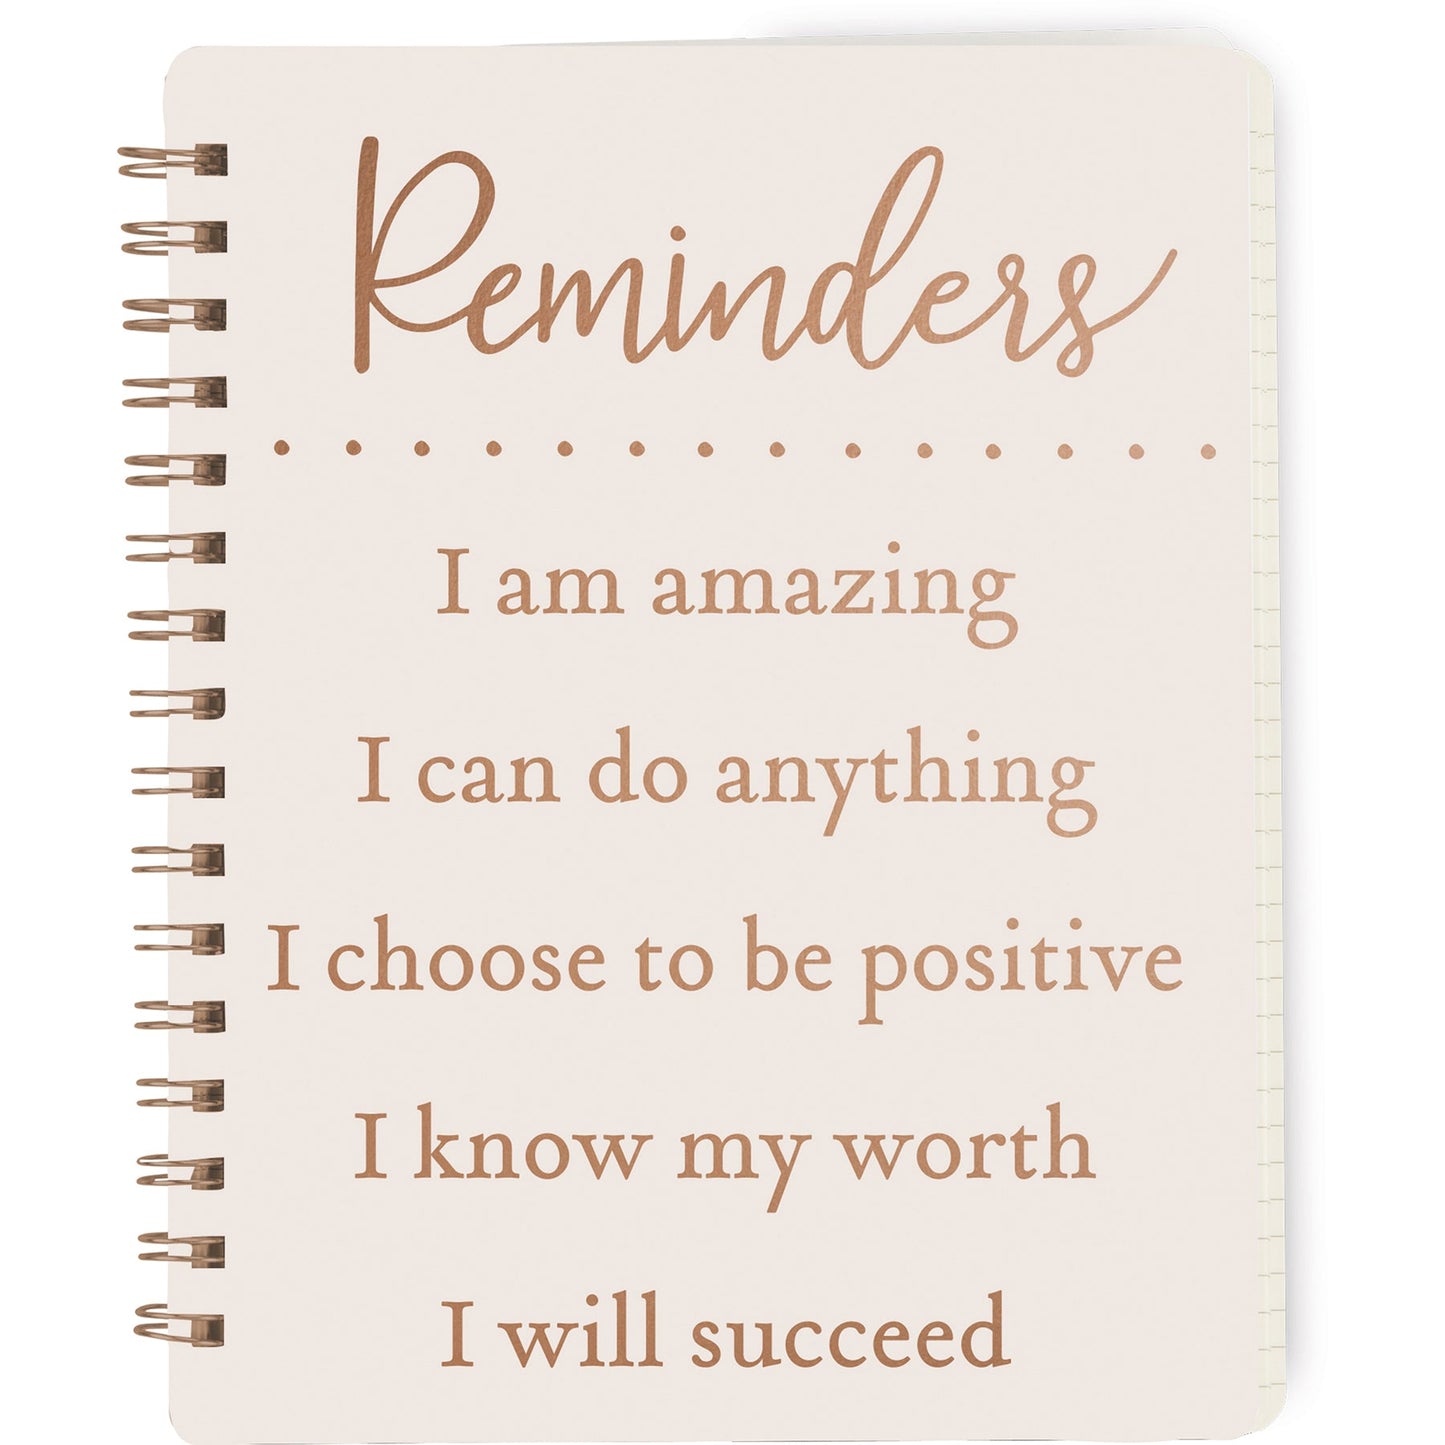 Positive Reminders - I Am Amazing Spiral Notebook | 5.75" x 7.50" | 120 Lined Pages